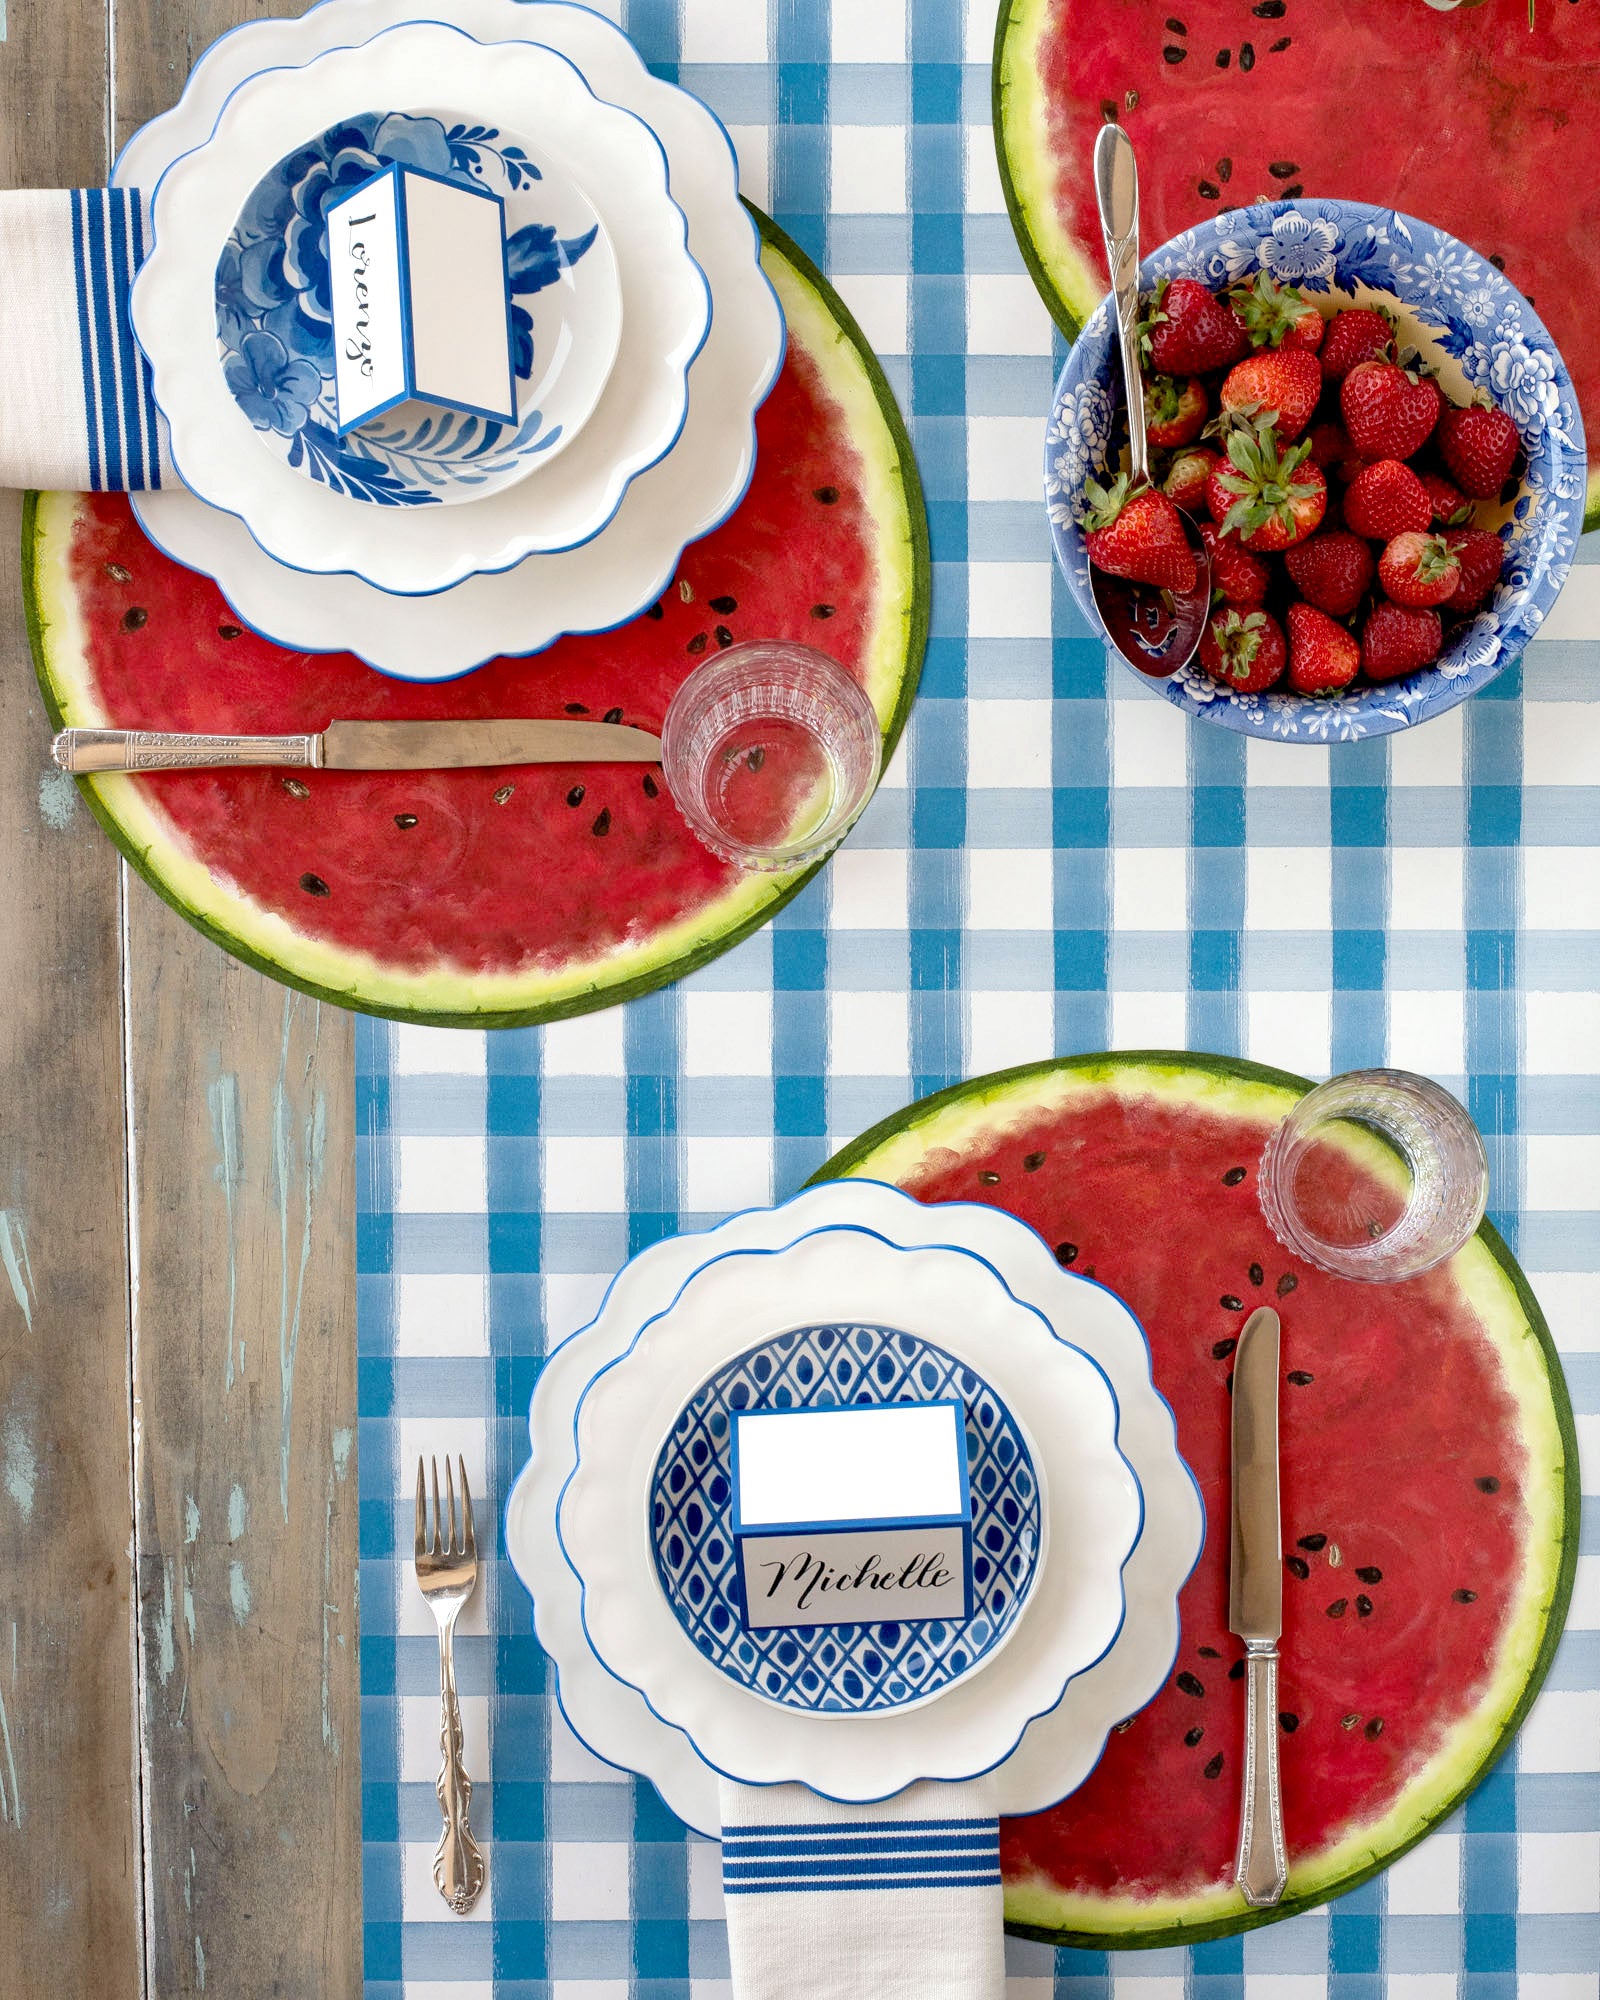 The Blue Painted Check Runner under an elegant summertime table setting, from above.